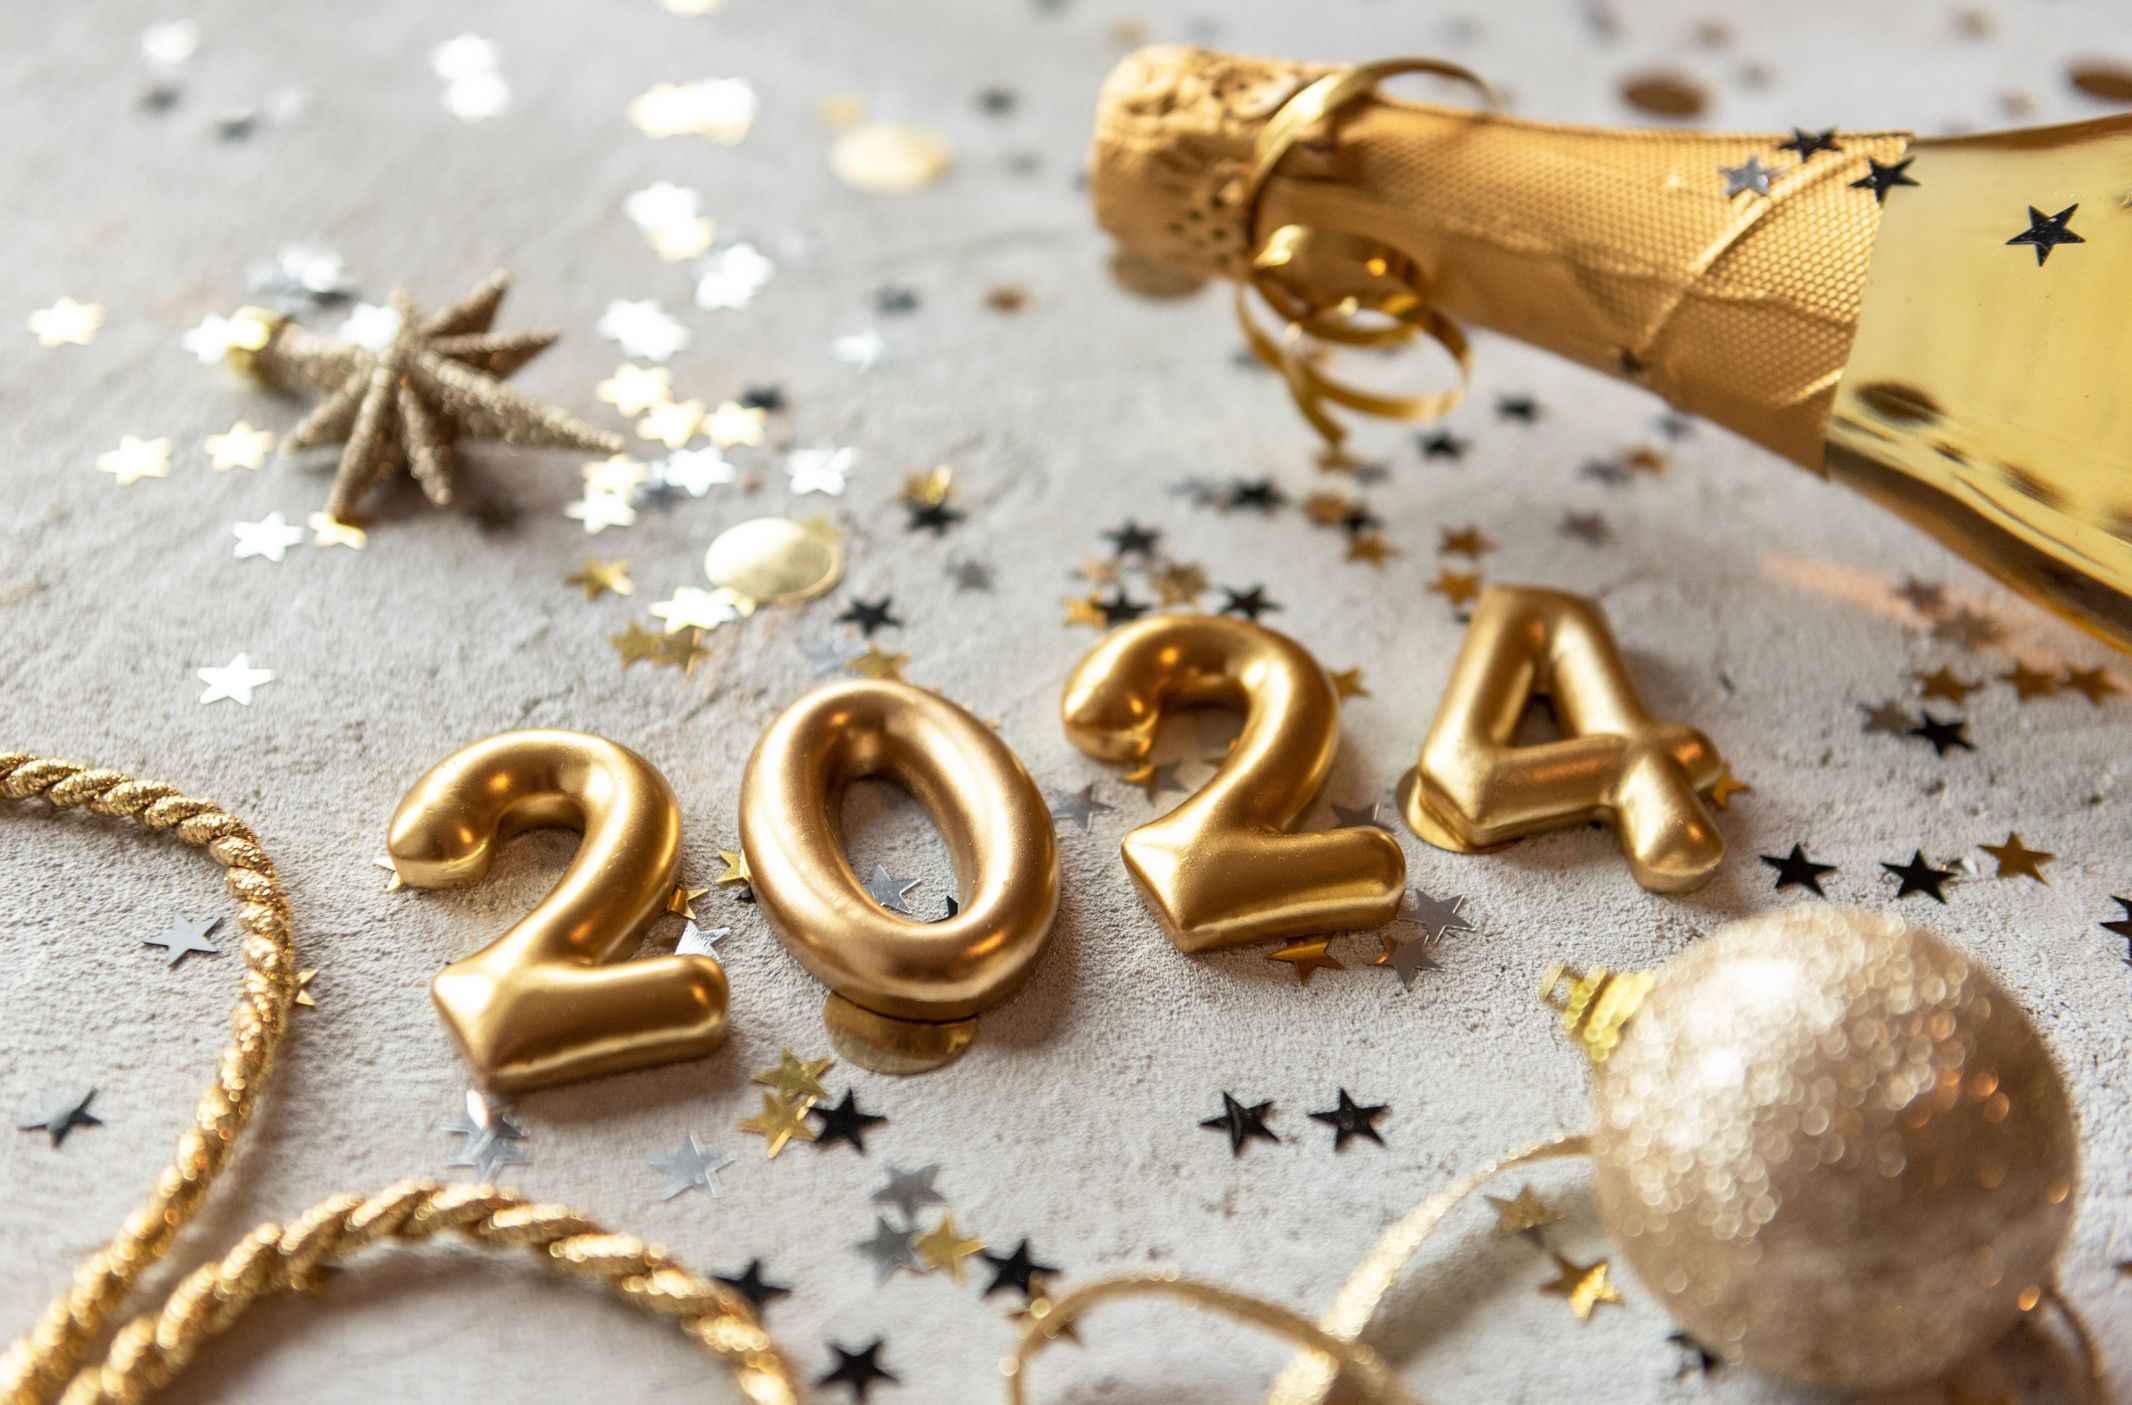 65 Best New Year's Resolutions for 2024 - Good New Resolution Ideas